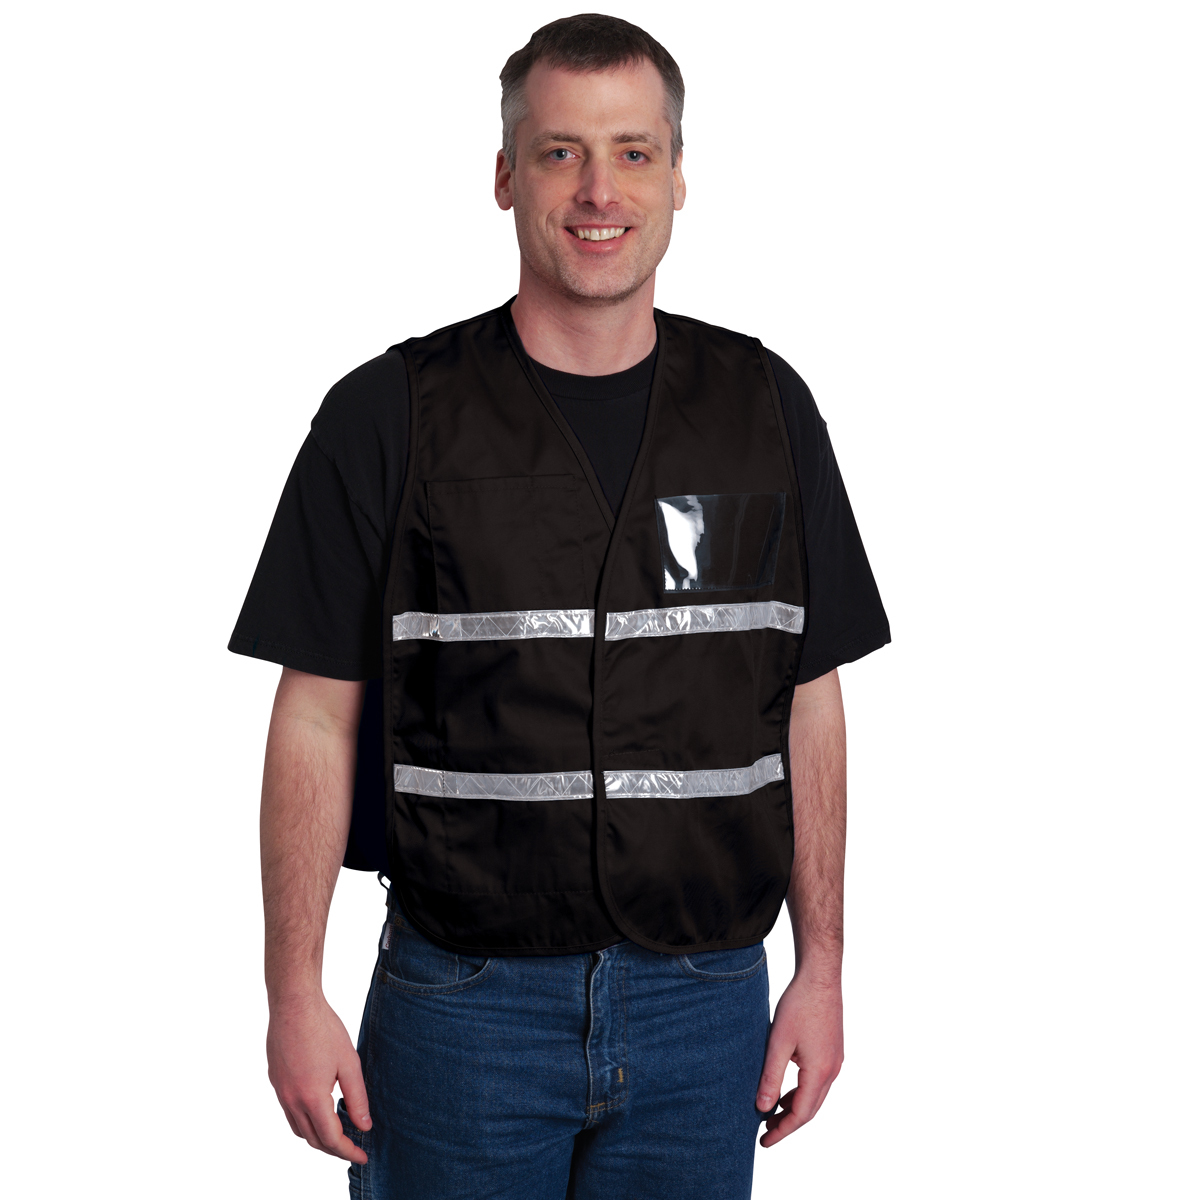 PIP® One Size Fits Most Black Cotton Polyester Command Vest